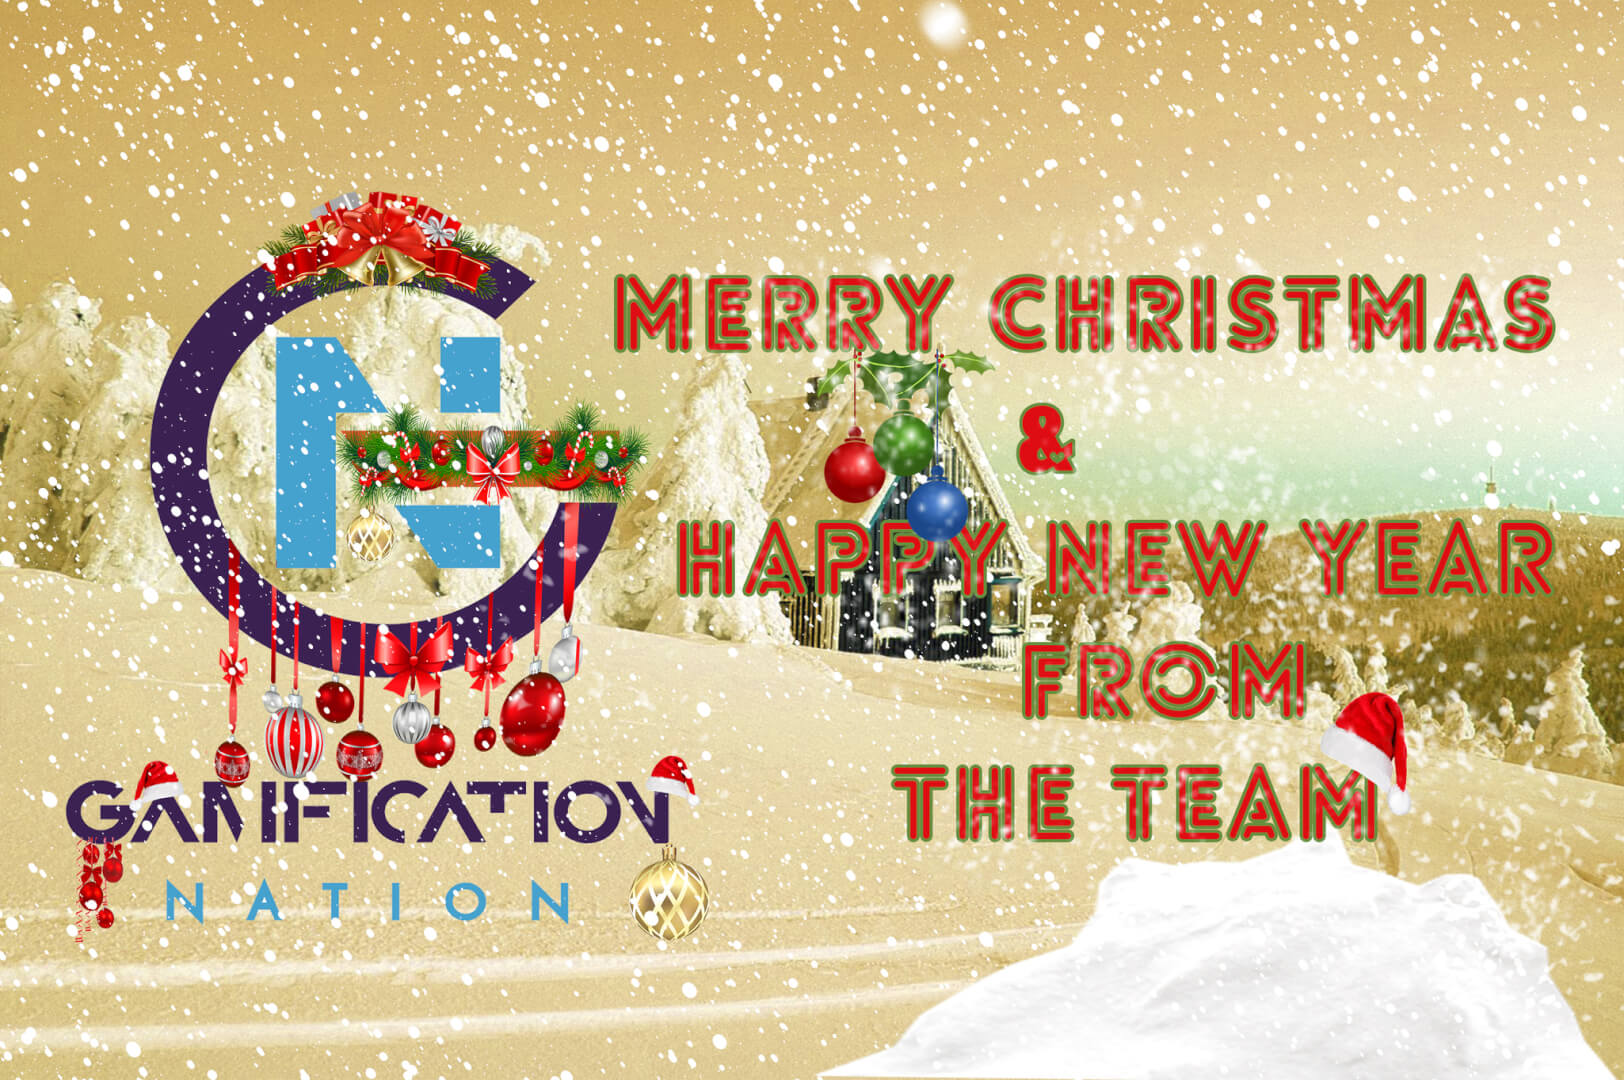 Christmas deals from Gamification Nation